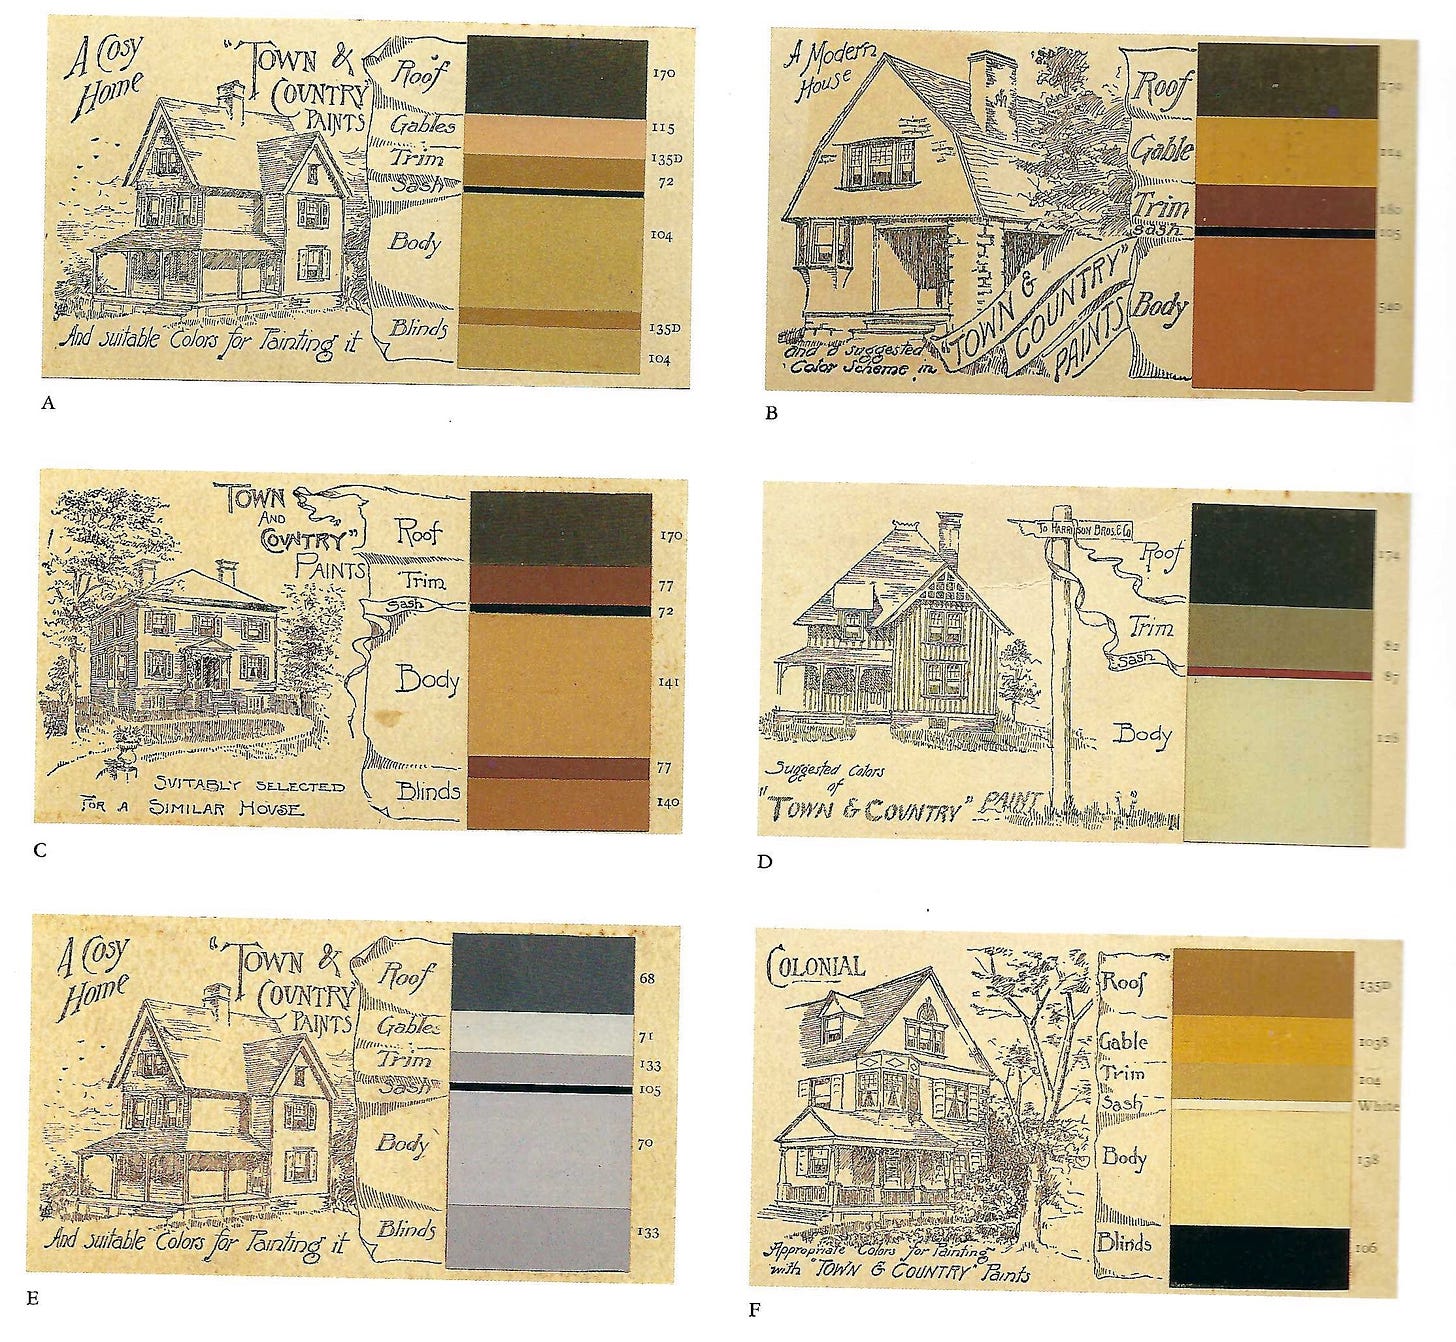 Six paint cards, each featuring a line drawing of a different style of Victorian house and several paint colors that are recommended for the body, sash, trim, and roof.